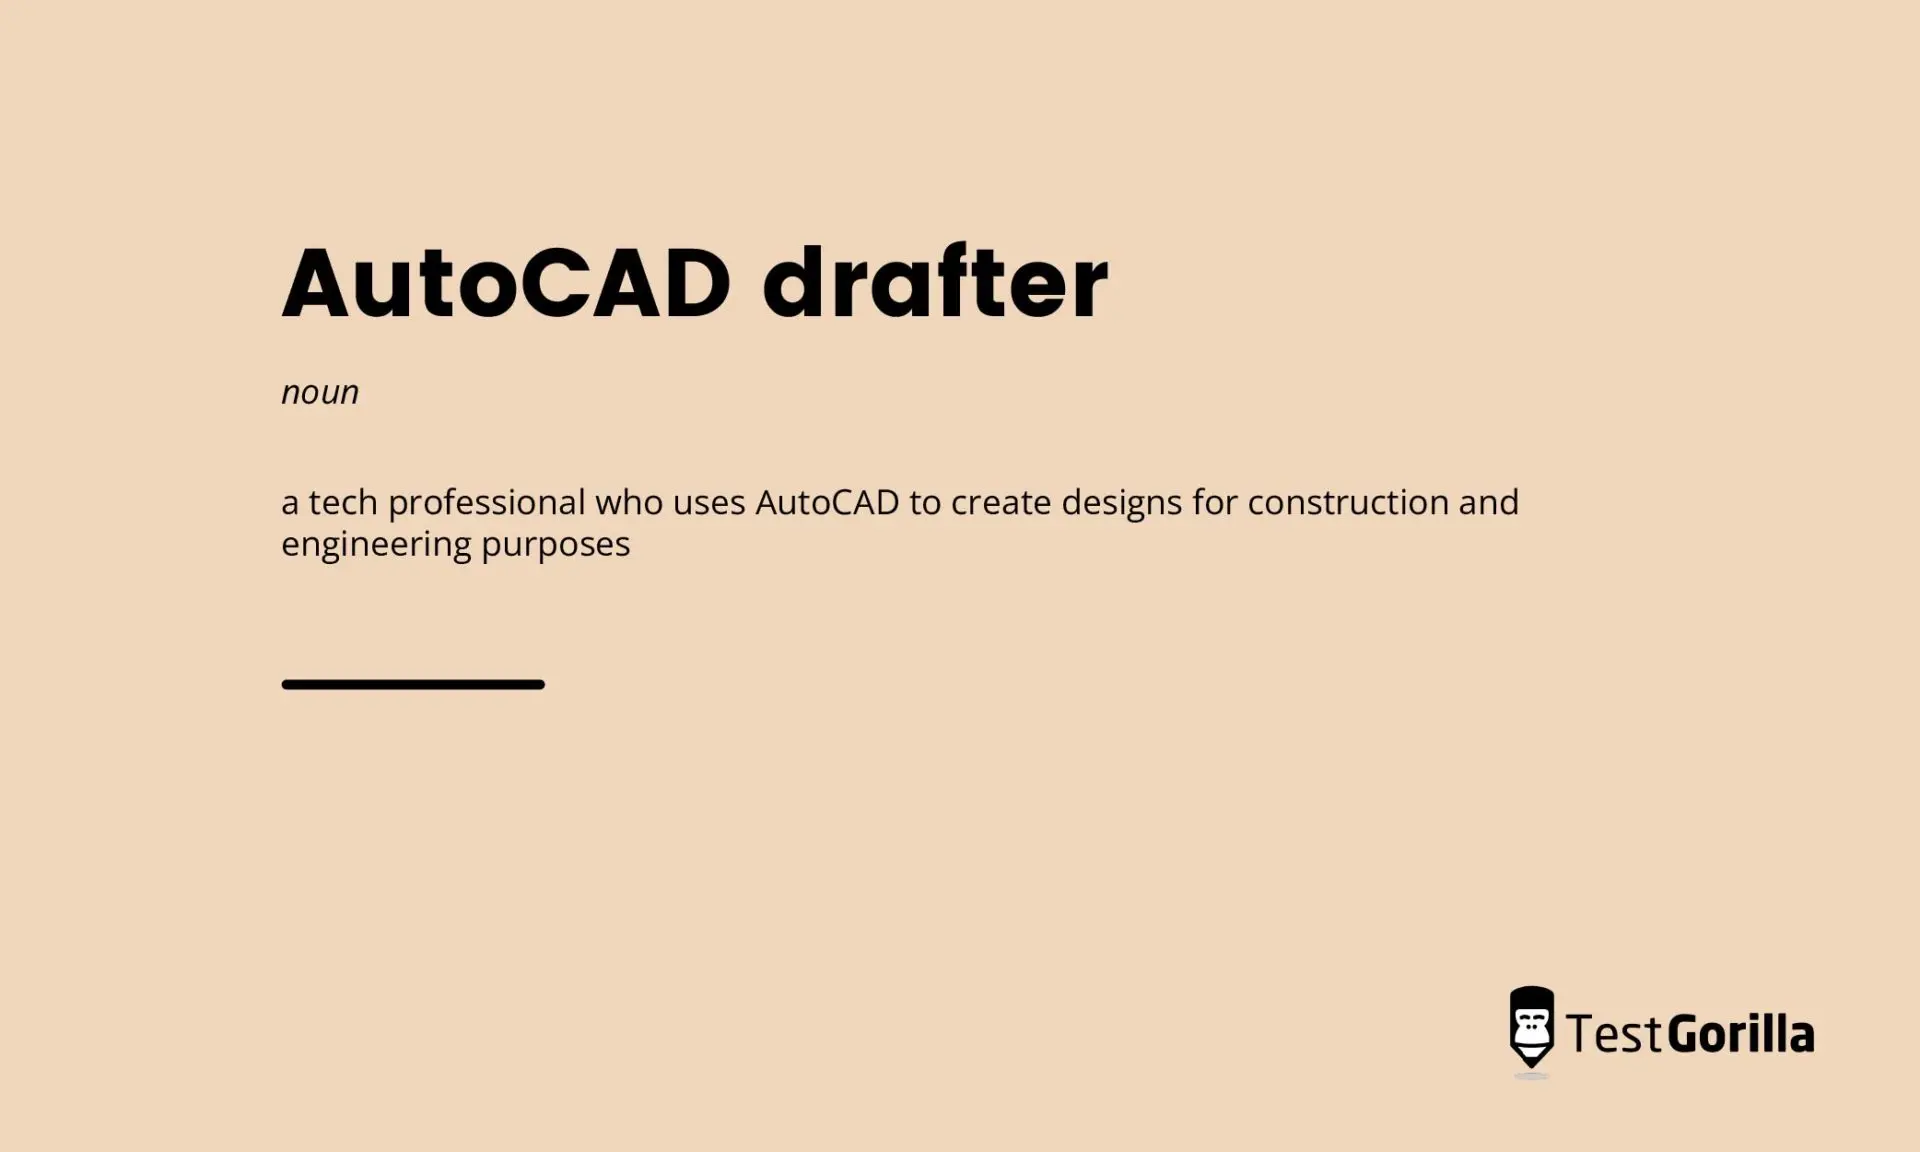 What is an AutoCAD drafter?